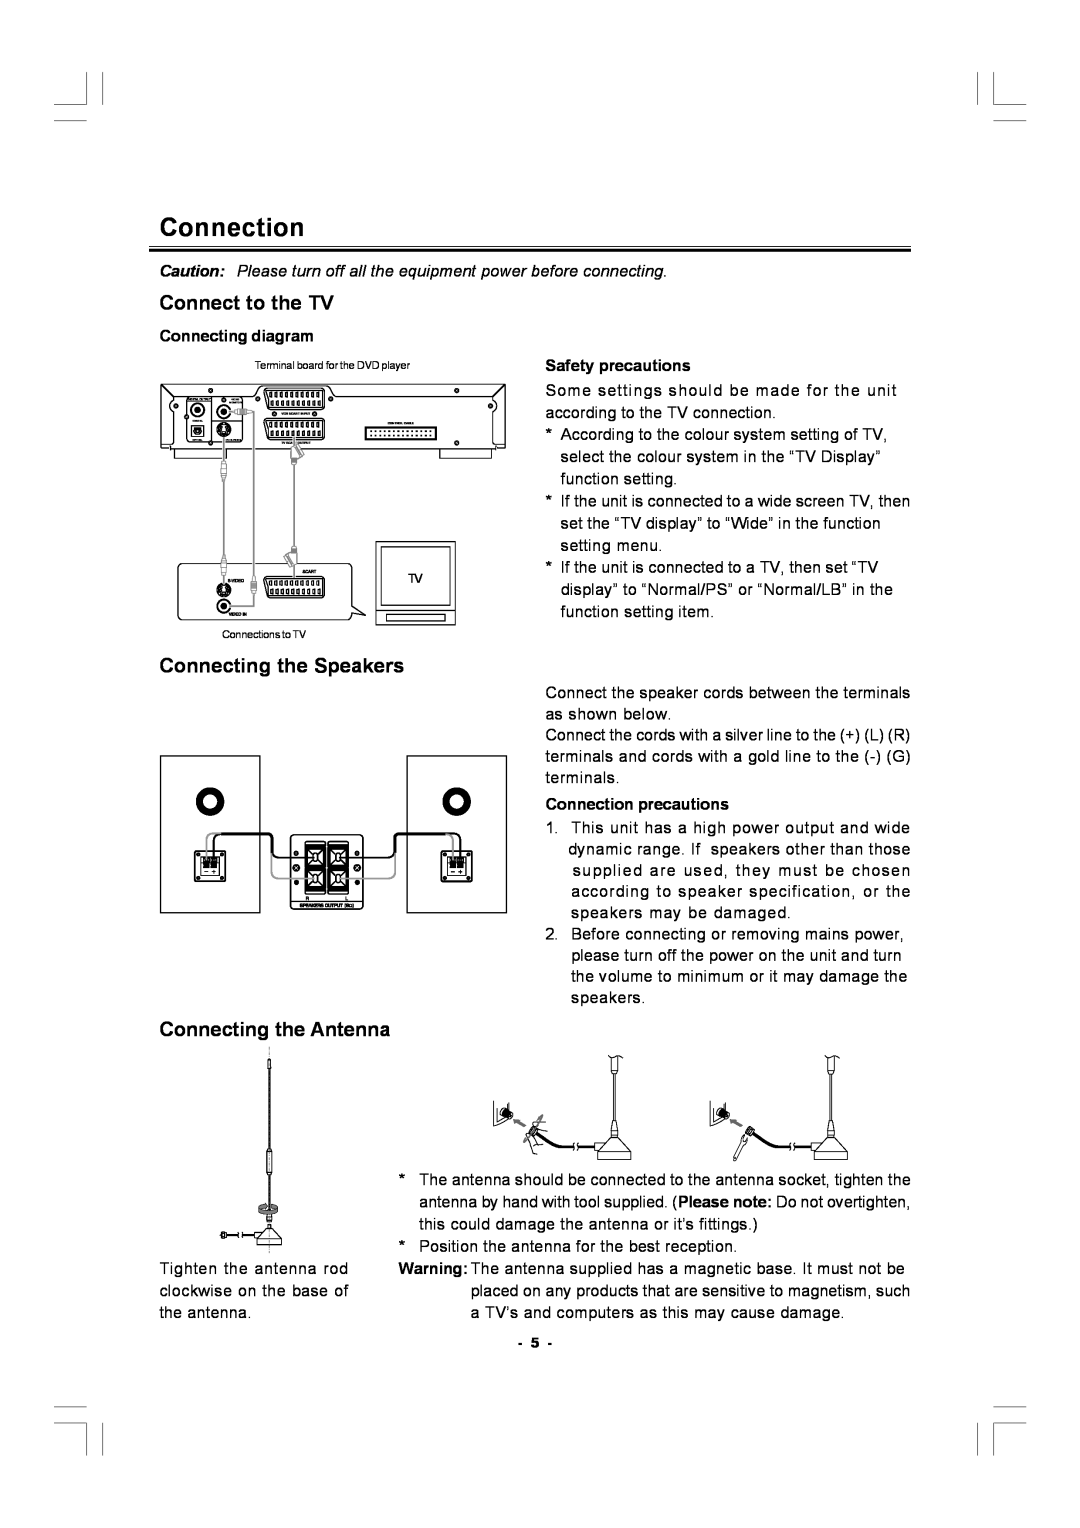 Hitachi AX-M140 manual Connection, Connect to the TV, Connecting the Speakers, Connecting the Antenna 